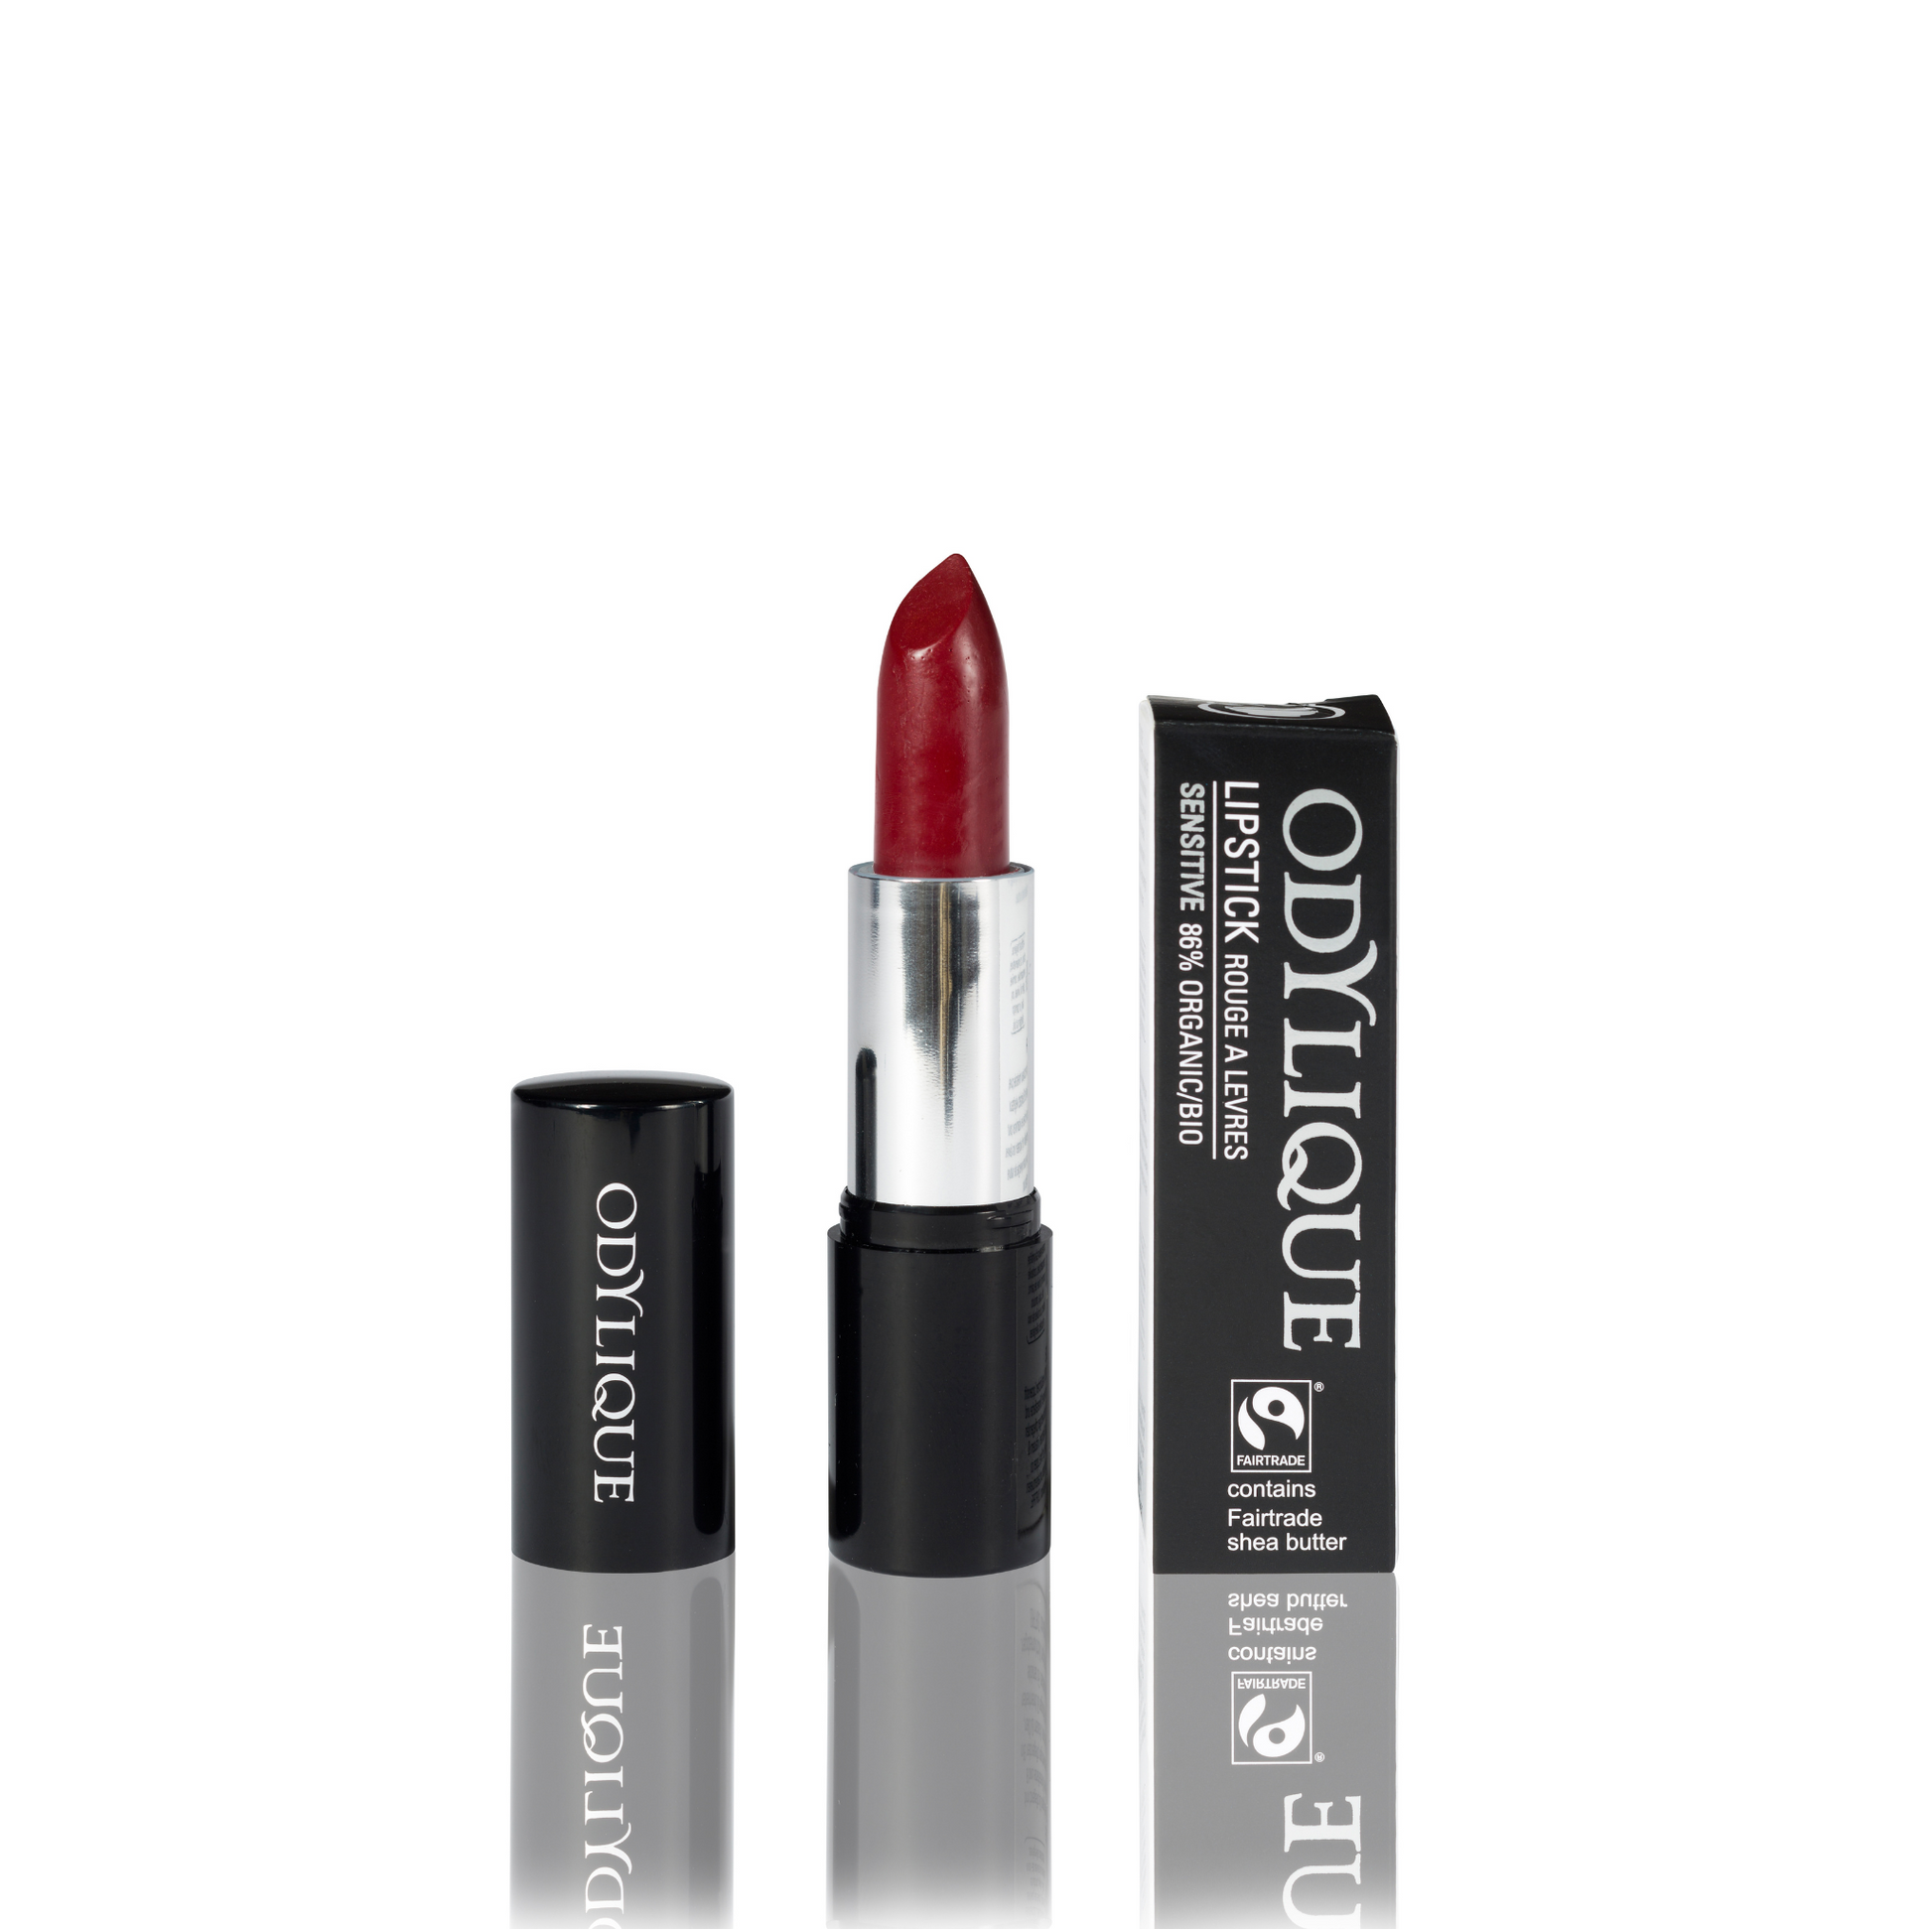 Odylique lipstick in Cherry Tart (sheer, vibrant cherry red) partially twisted up from its black tube, positioned next to its packaging on a reflective surface.